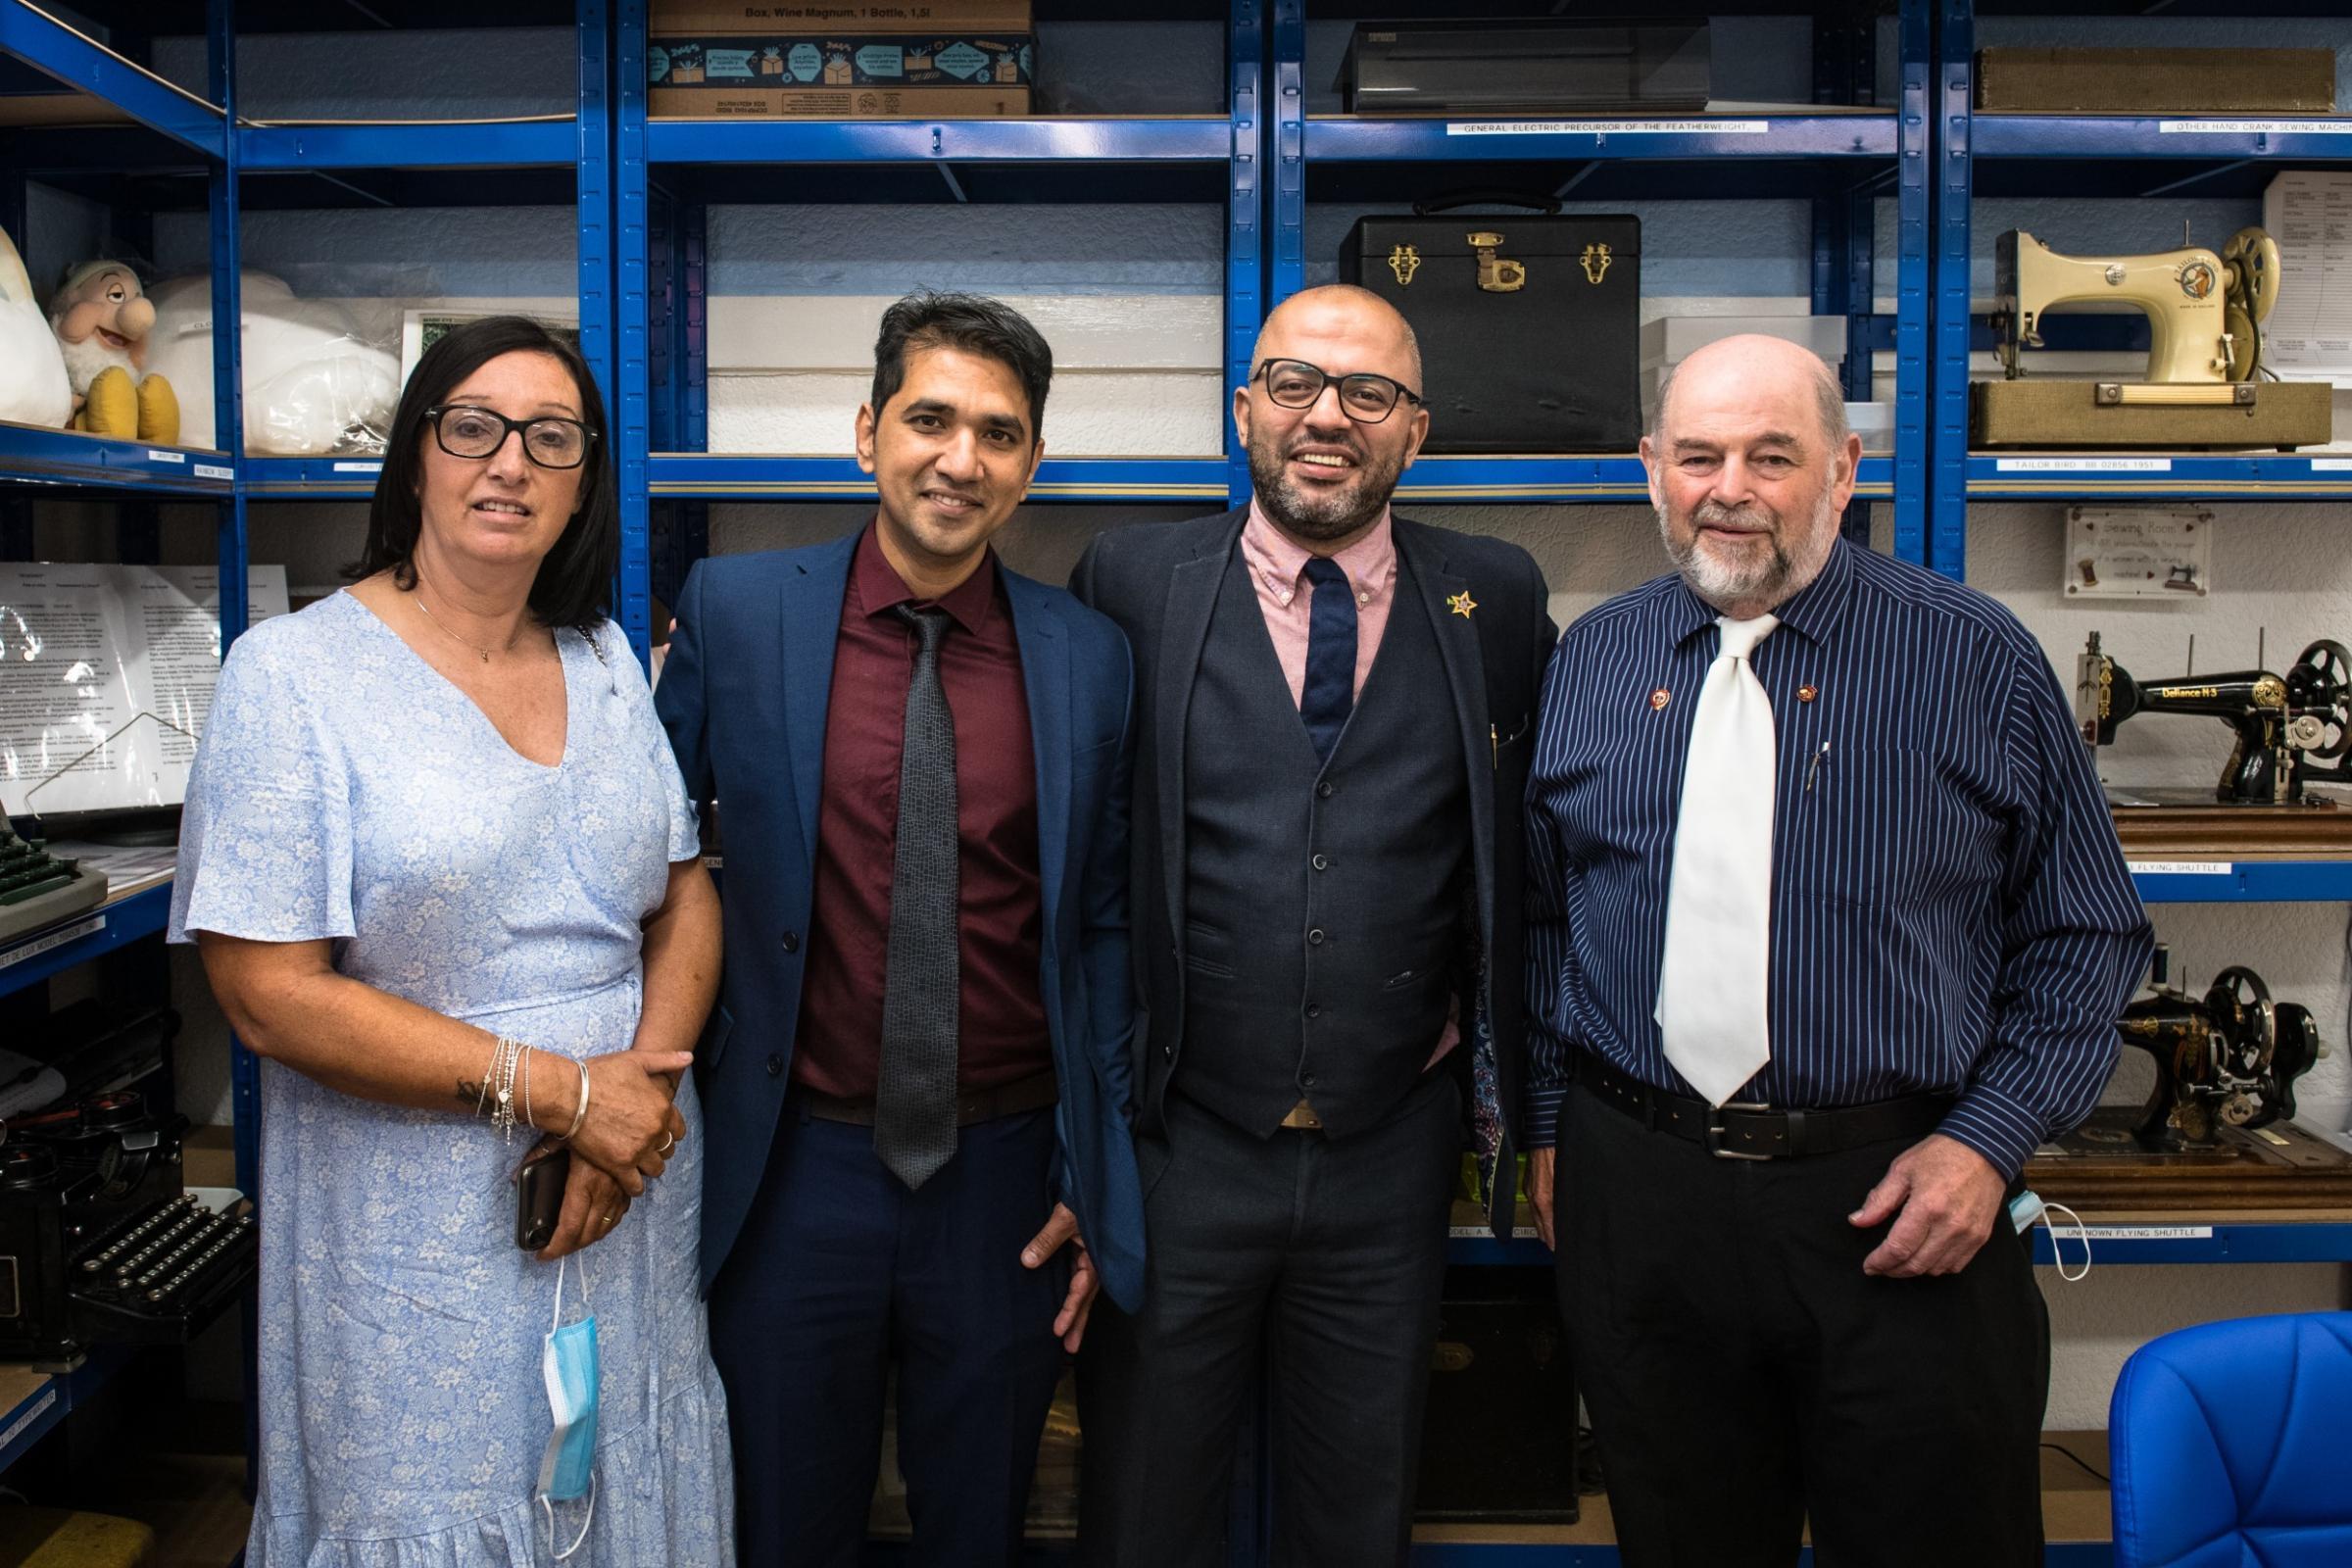 Susan Best (PA), Dr. Mauin Uddin (Cardiac Team), Mr Mohamad Zeinah from Liverpool Heart and Chest Hospital and Frank Meldrum